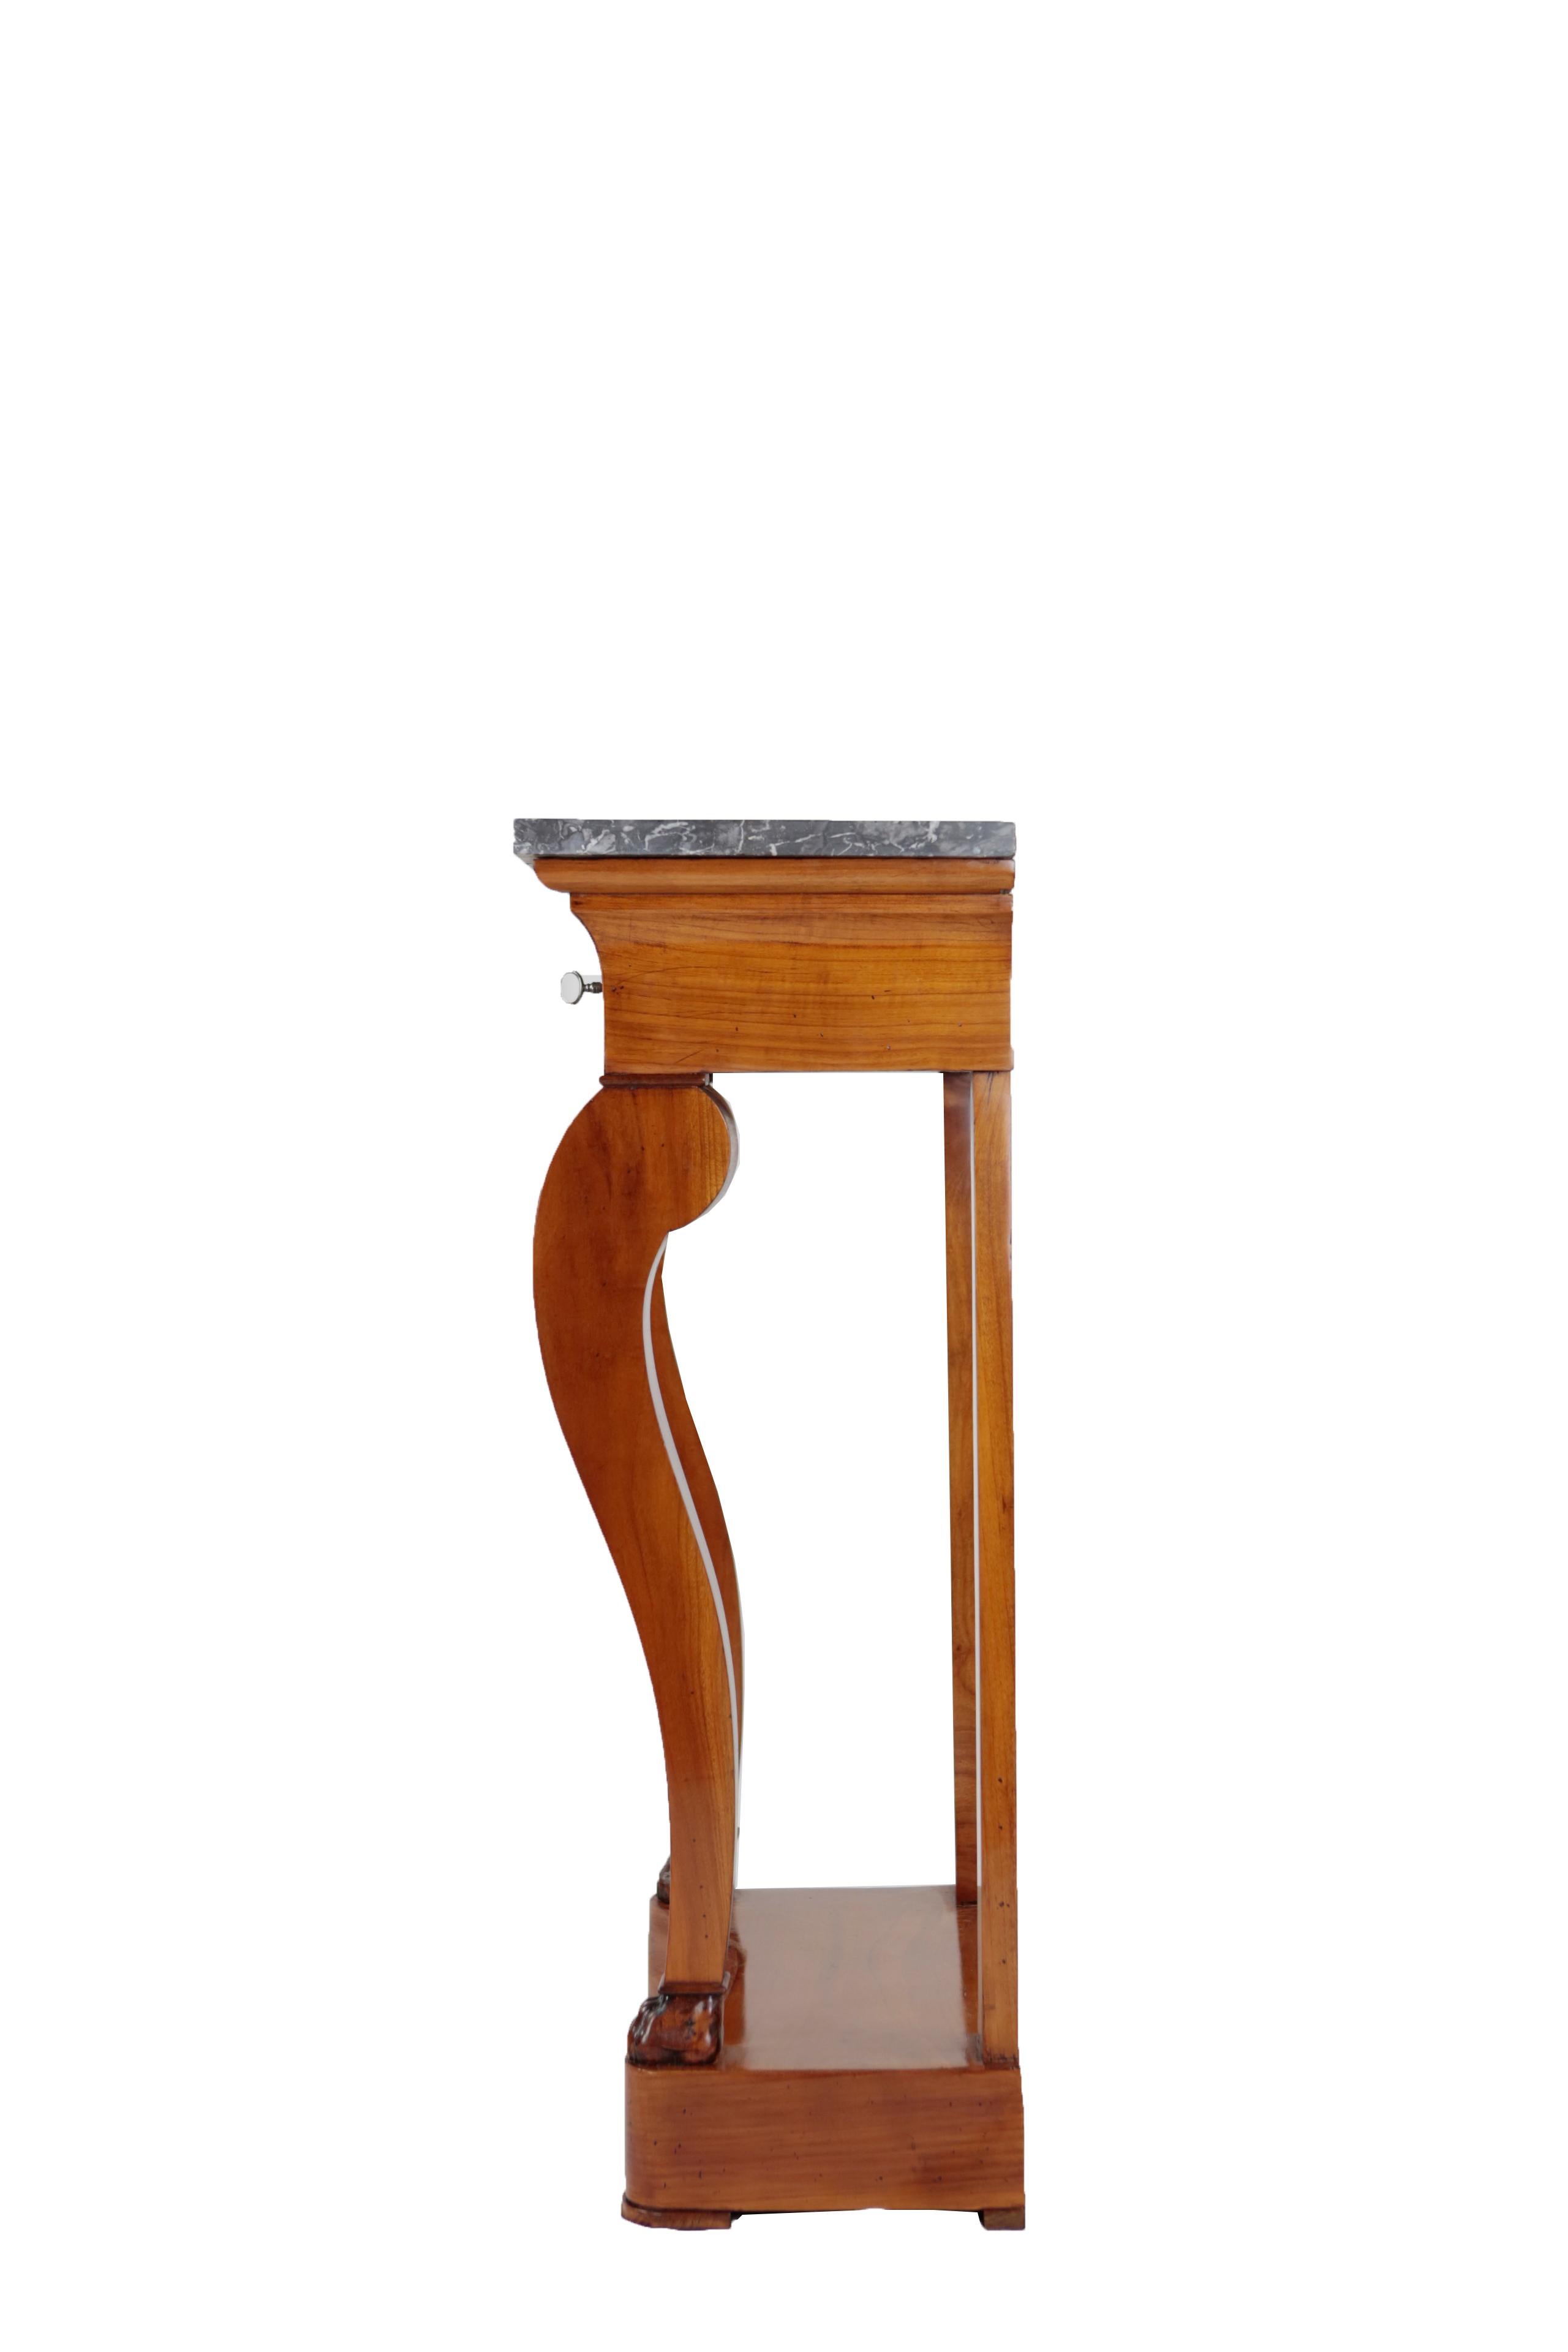 Polished 19th Century Biedermeier Period Console Table with Marble Top, Cherrywood Veneer For Sale